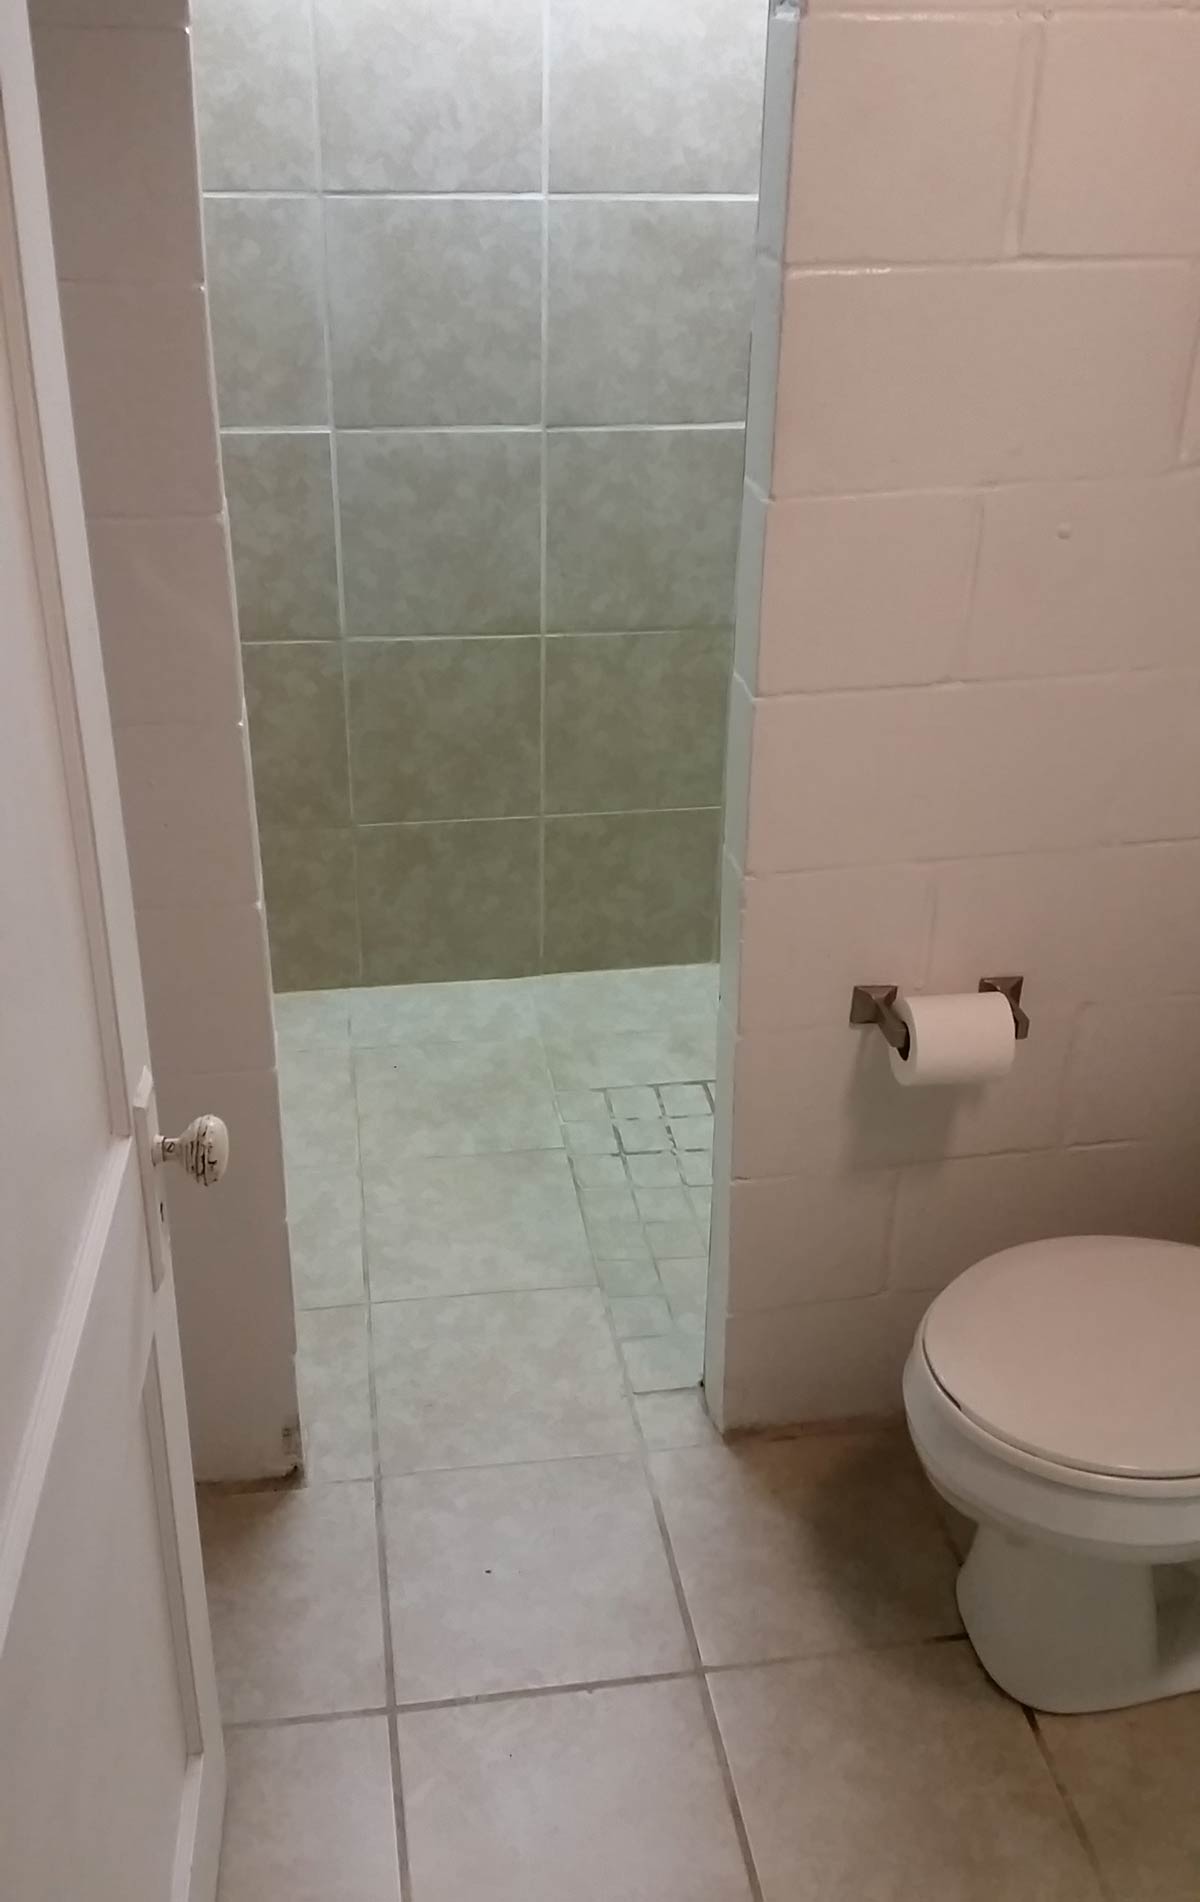 3107 Lincoln Way - bathroom and walk in shower in finished basement